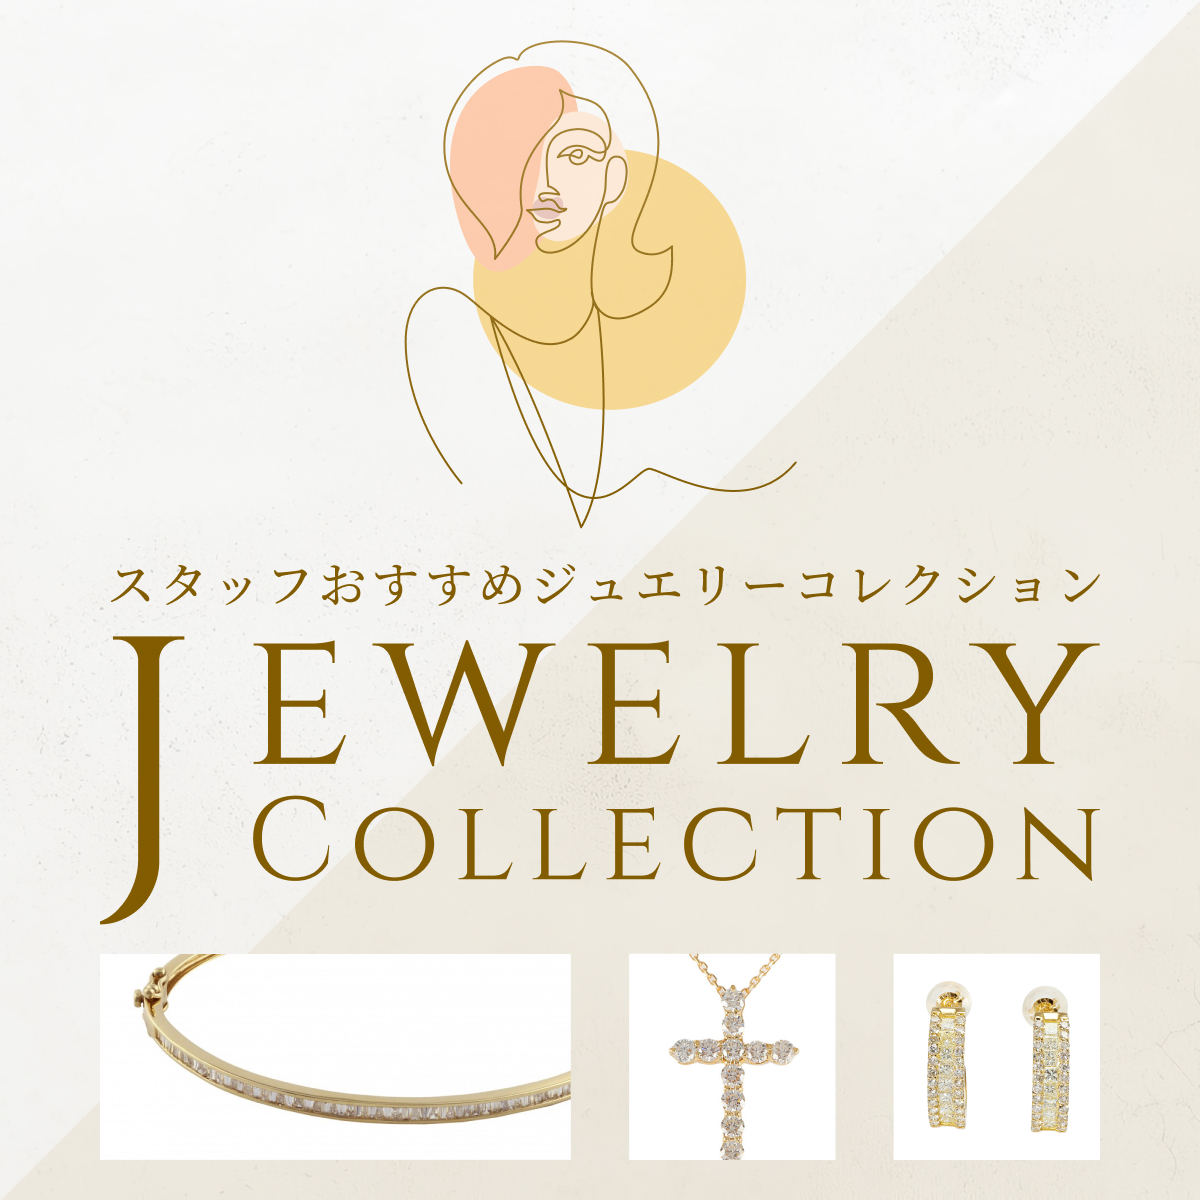 Staff recommended jewelry collection